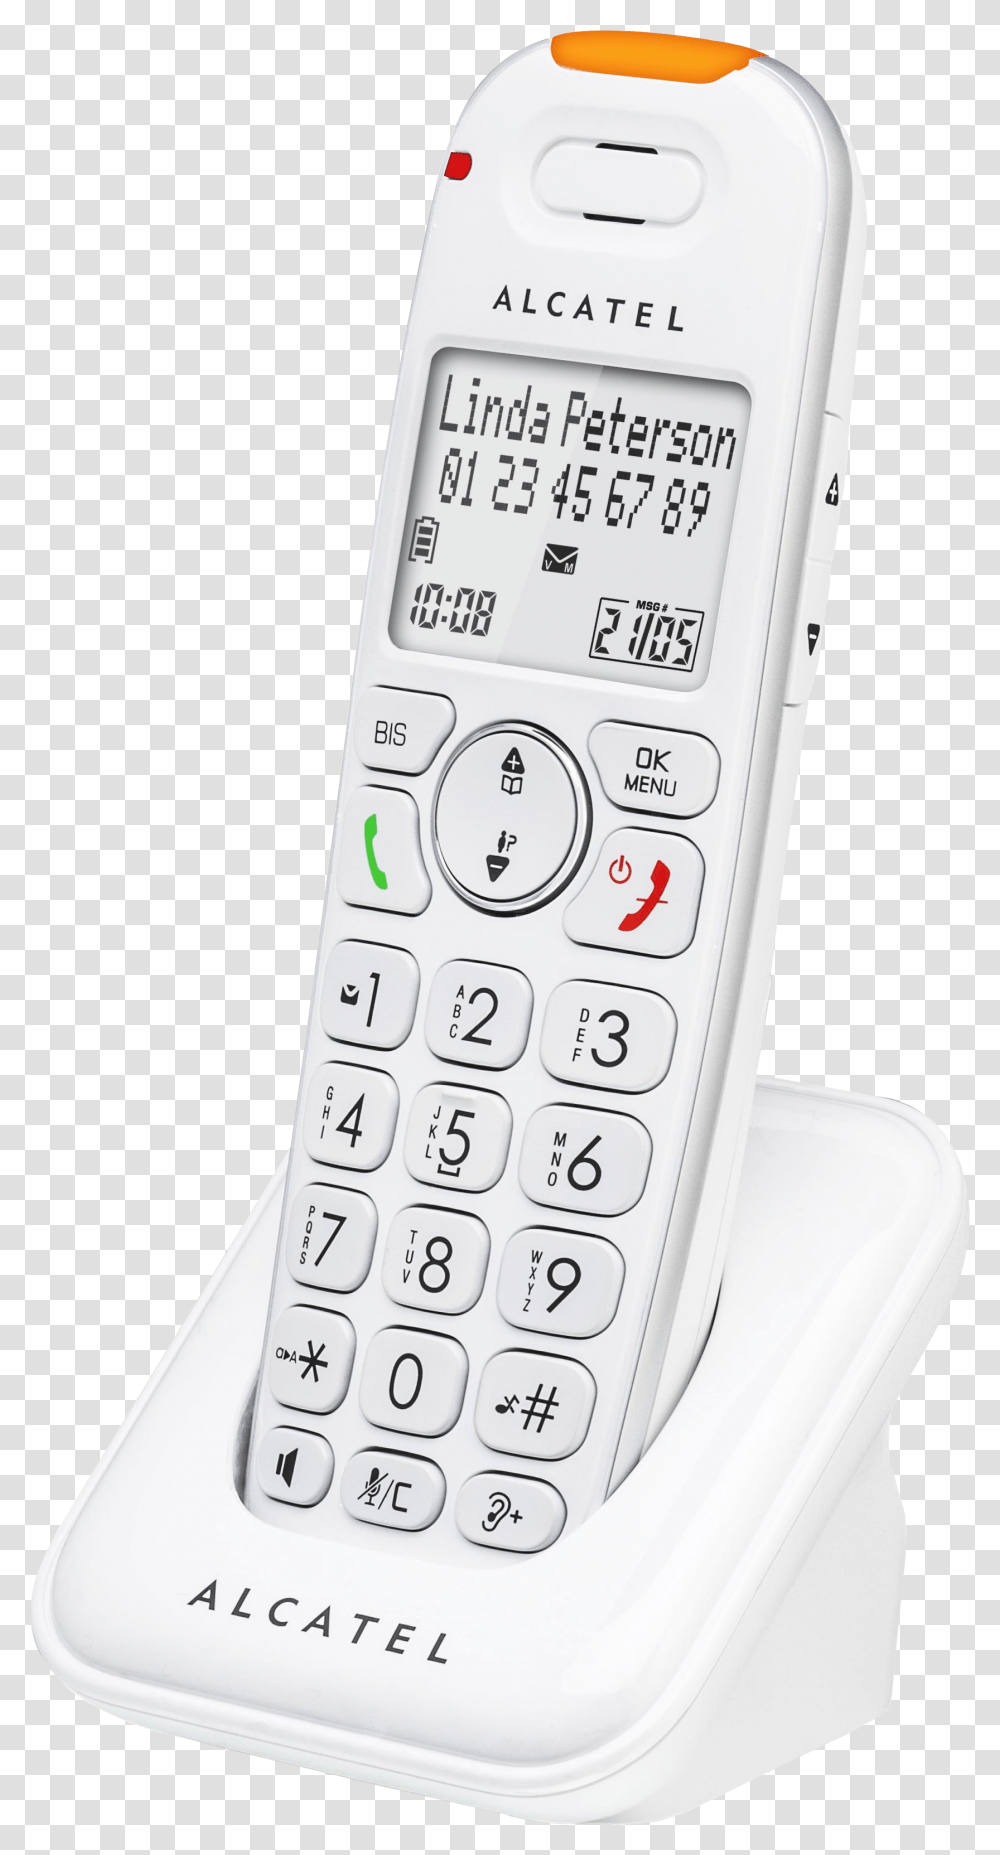 See Missed Calls Electronics Brand, Mobile Phone, Cell Phone, Remote Control Transparent Png